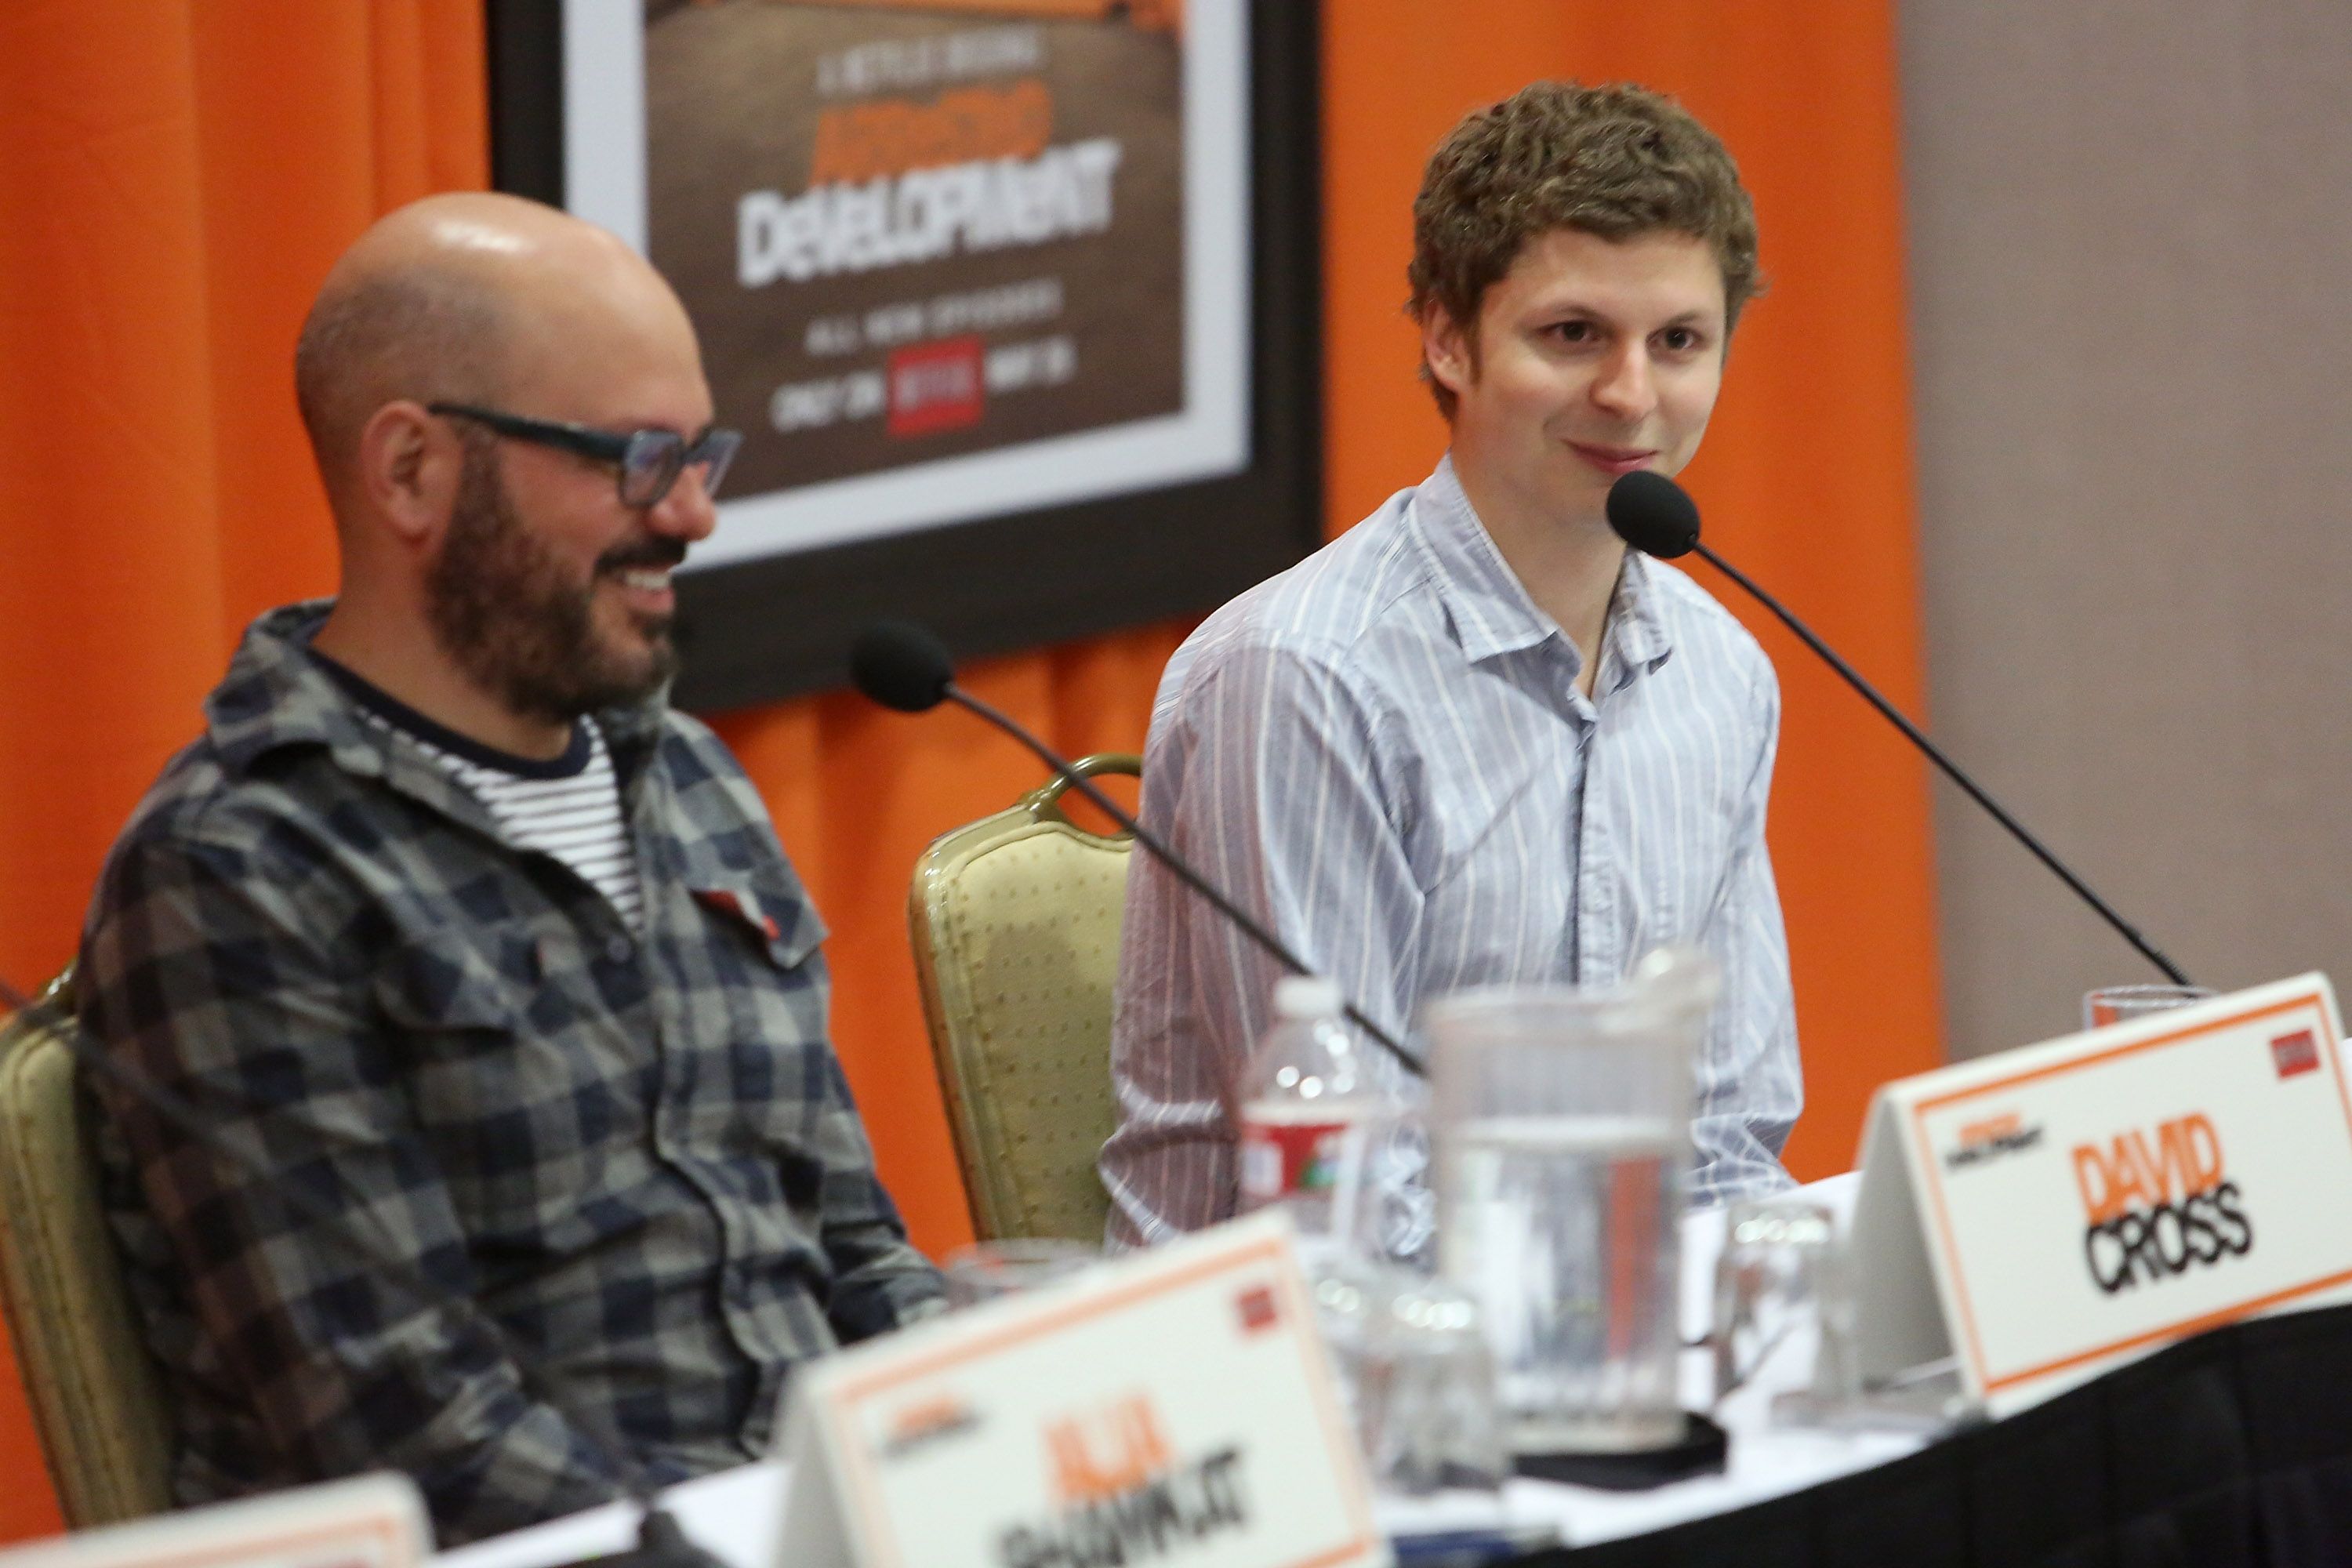 Michael Cera and David Cross at the Arrested Development press conference <blockquote class=